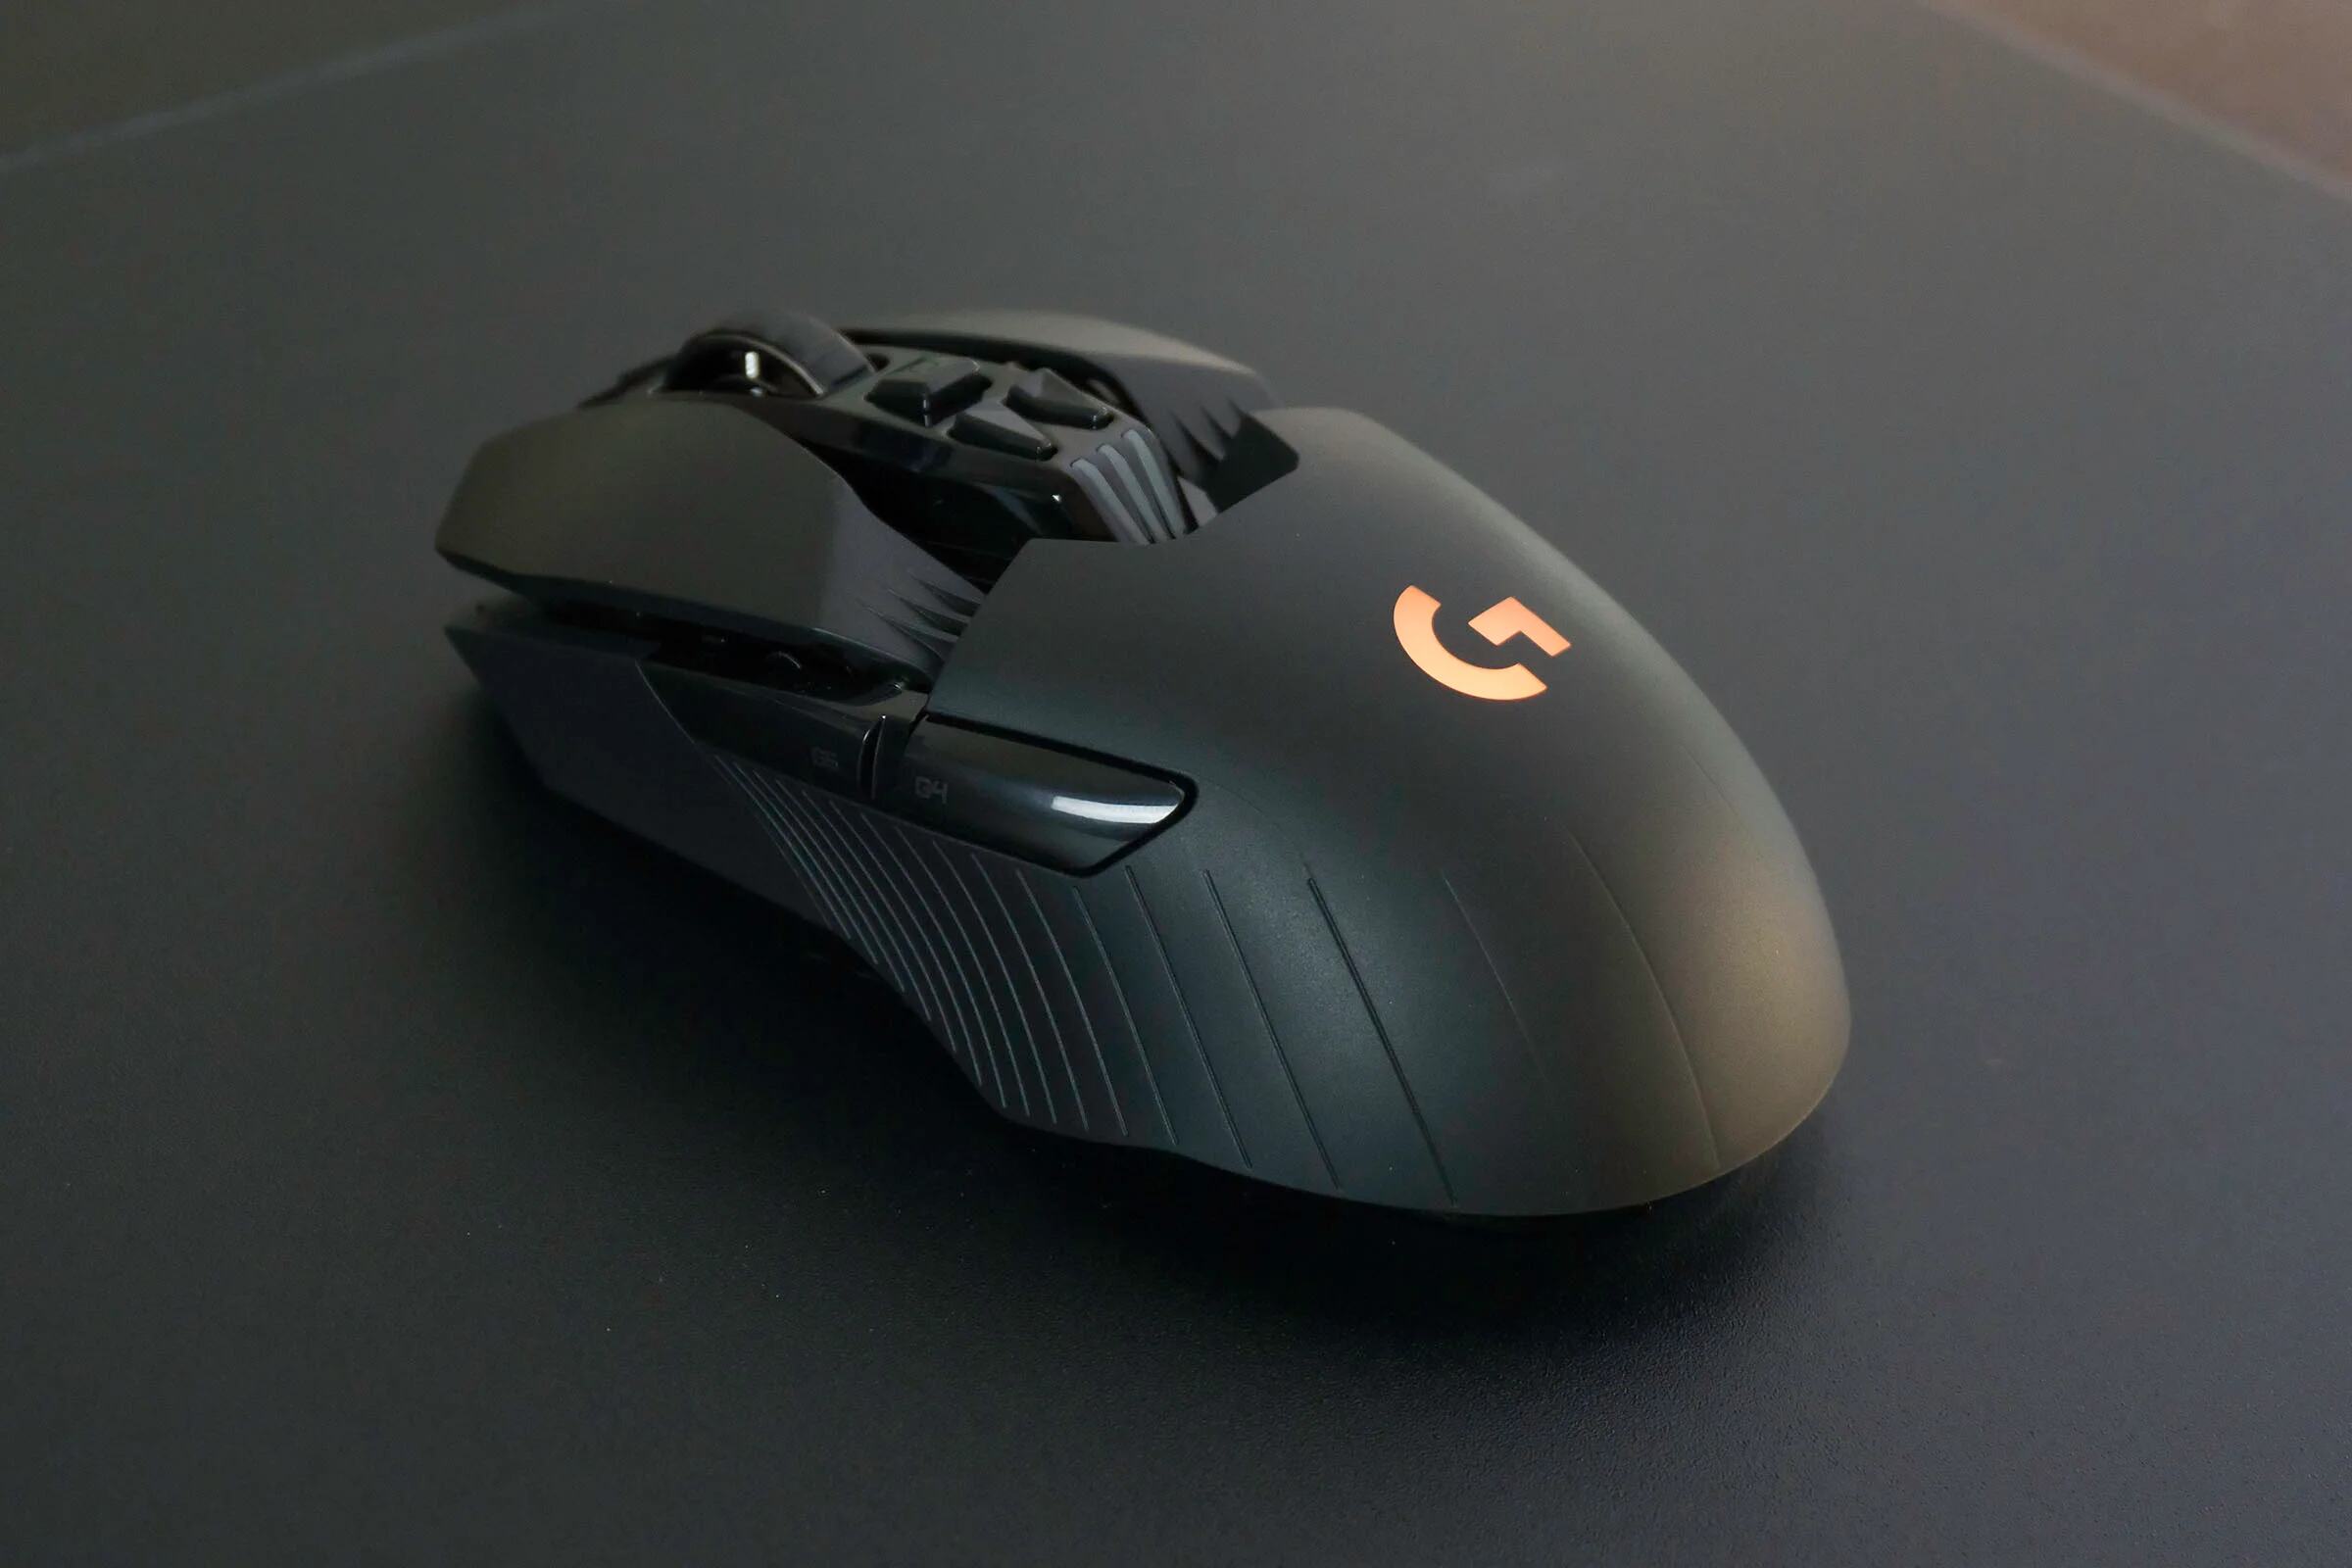 How To Bhop Script With Logitech Gaming Mouse